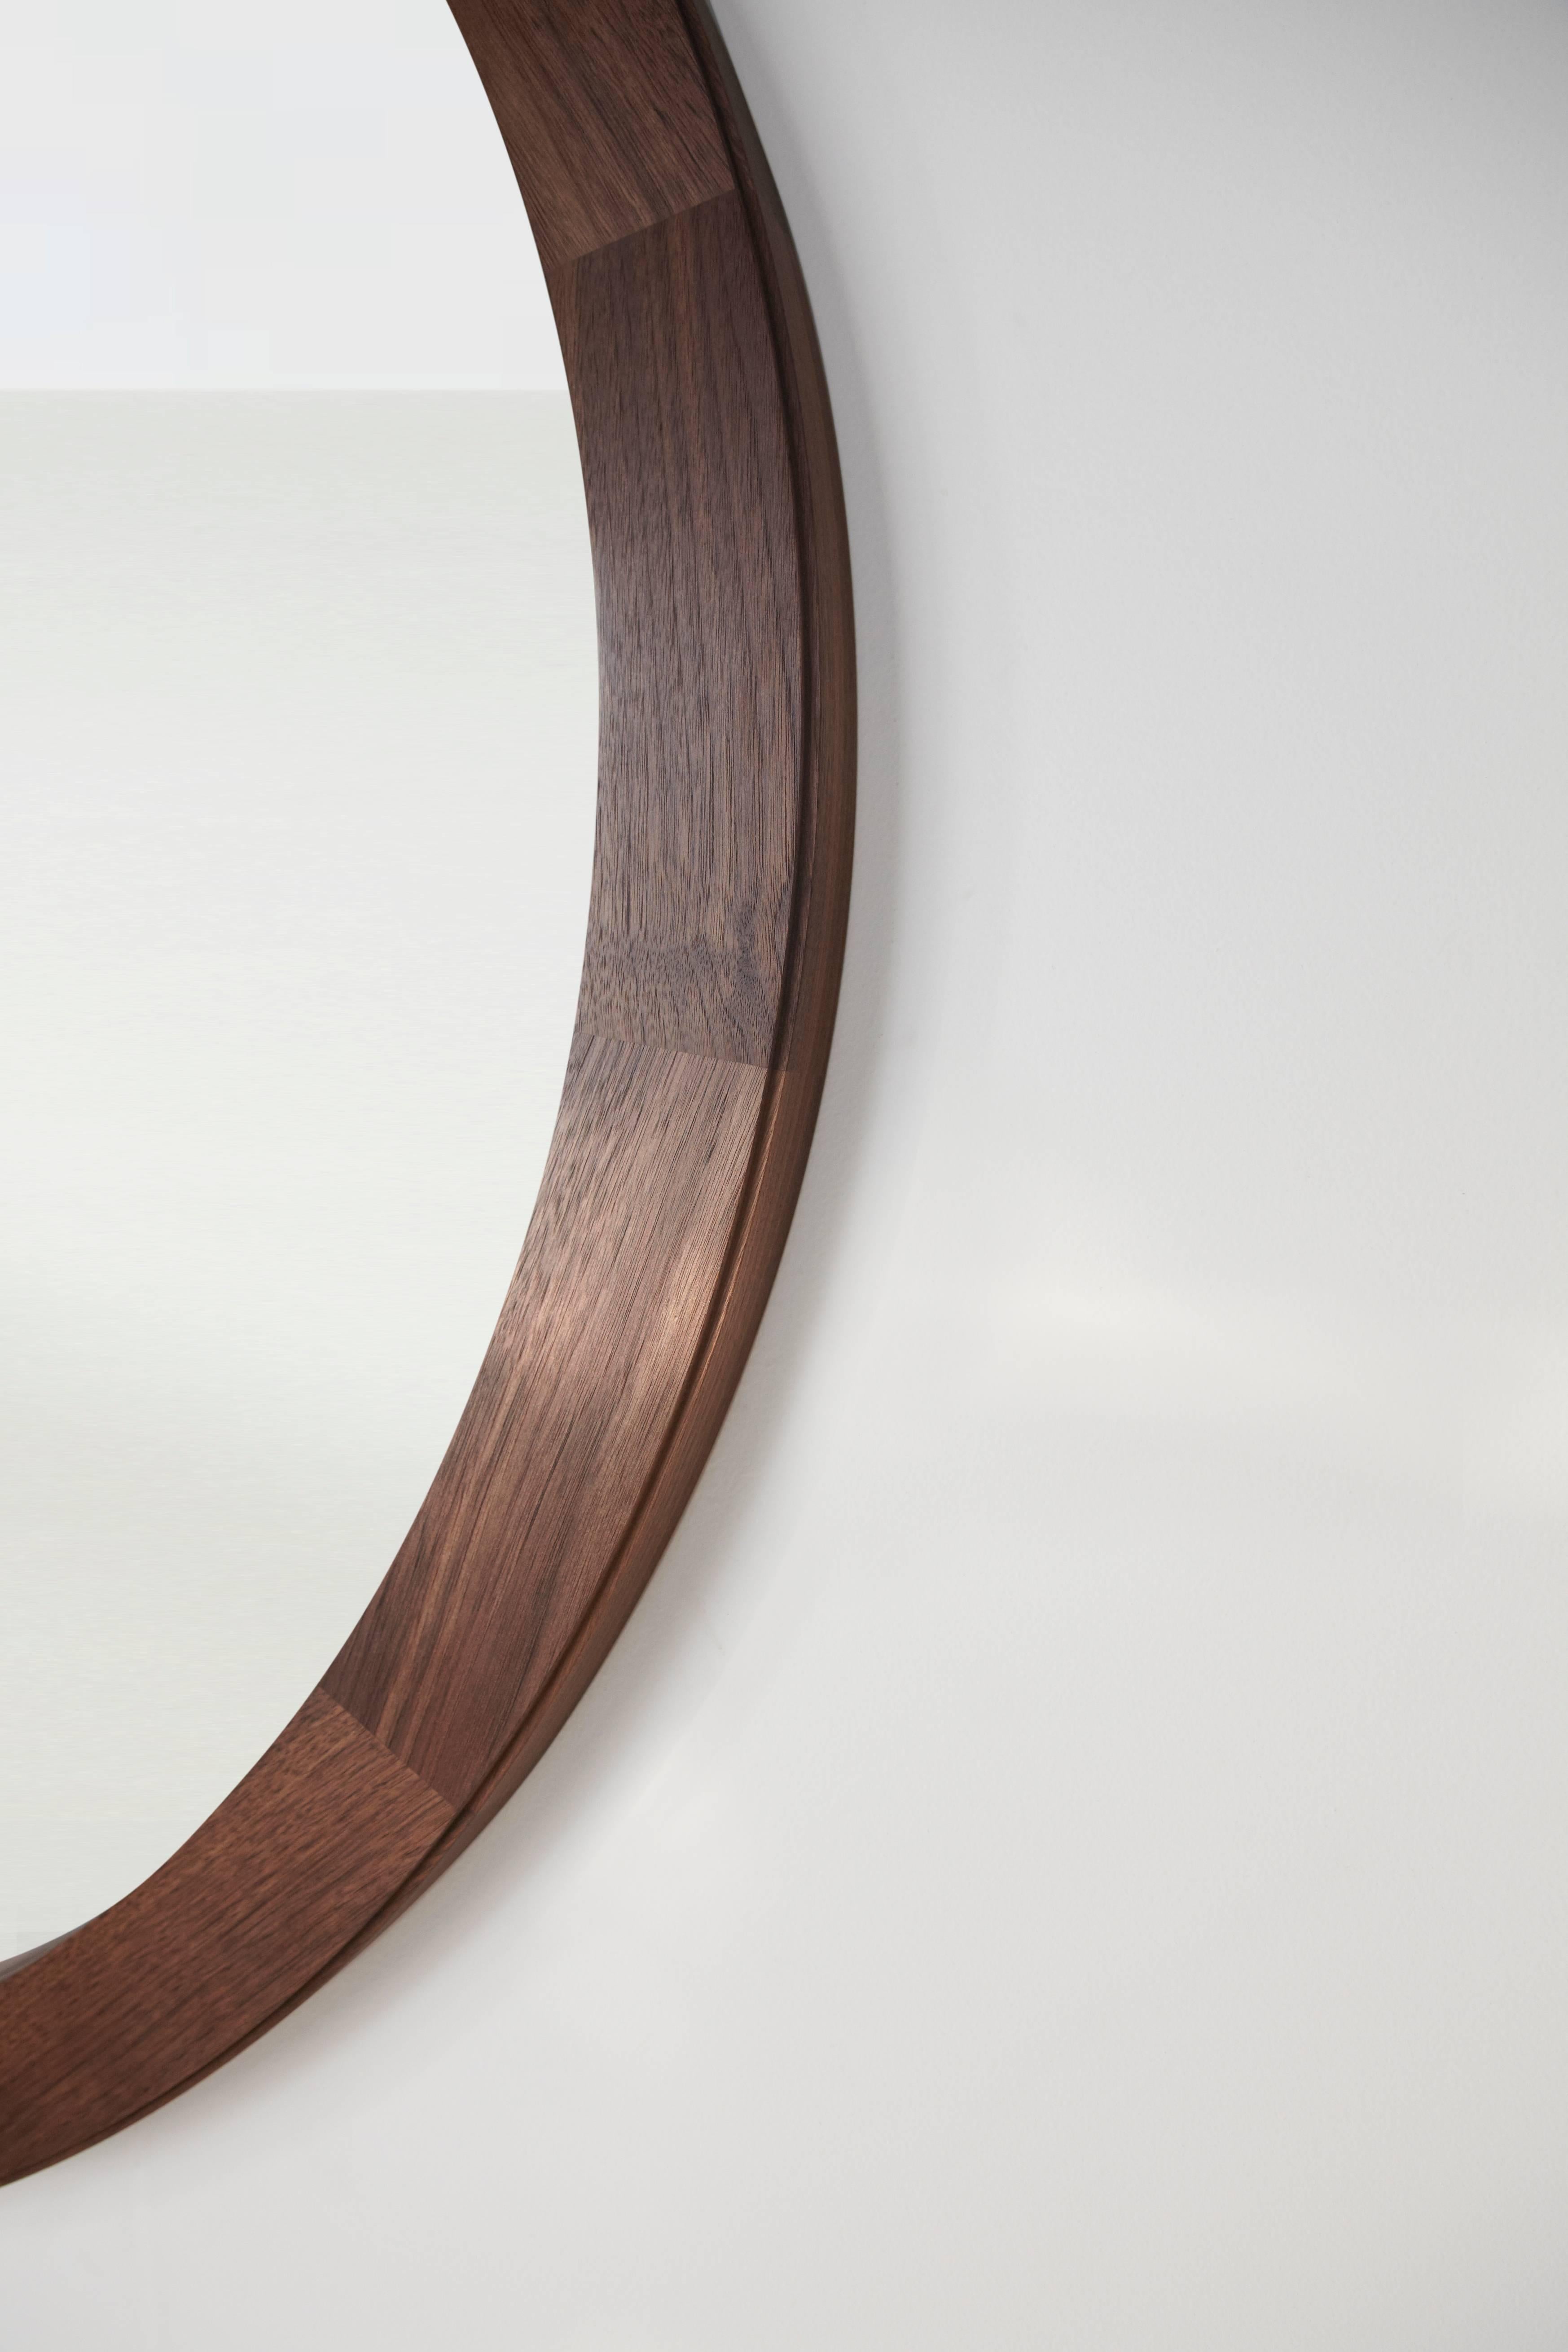 Cirque is a multi-tone wall and floor mirror. 14 wedges of timber are joined together and shaped into one harmonious ring. 

Shown above at 42